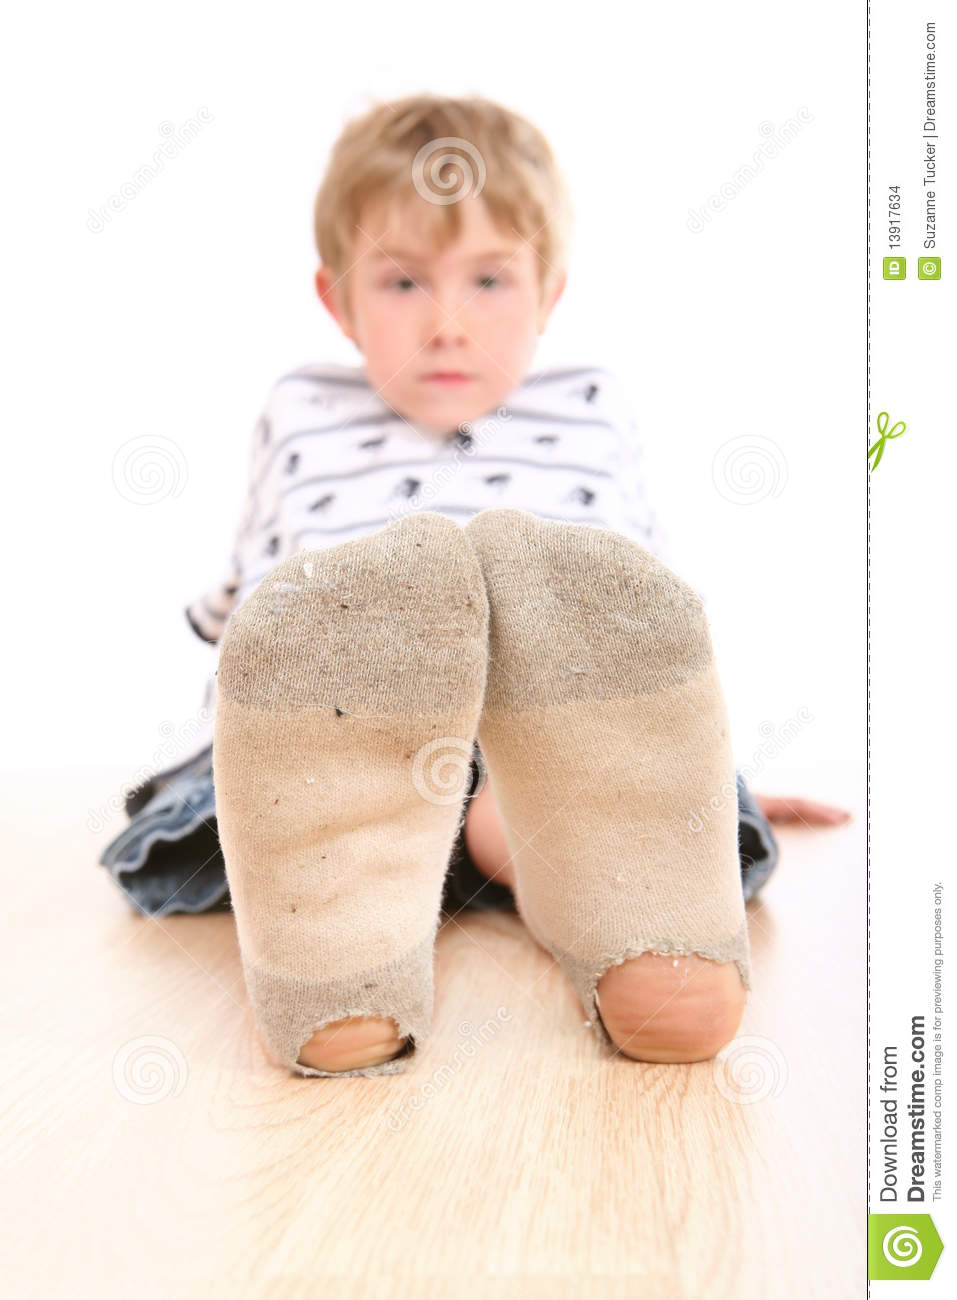 More Similar Stock Images Of   Boy Wearing Dirty Socks With Holes In